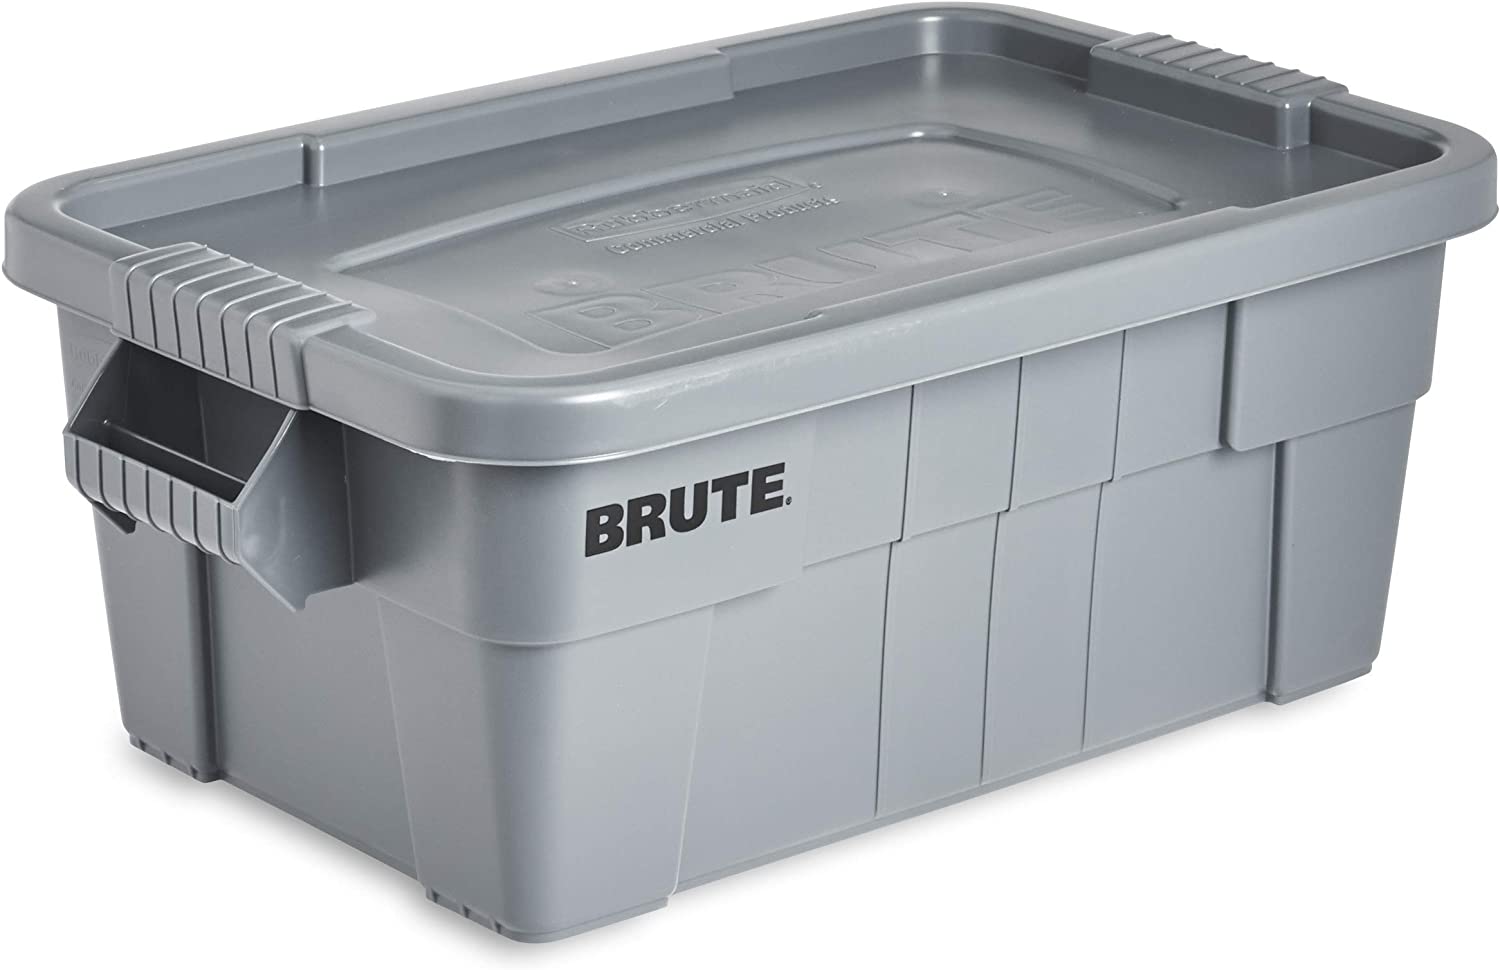 Rubbermaid Commercial BRUTE Tote Storage Bin with Lid, 14-Gallon, Gray (FG9S3000GRAY)